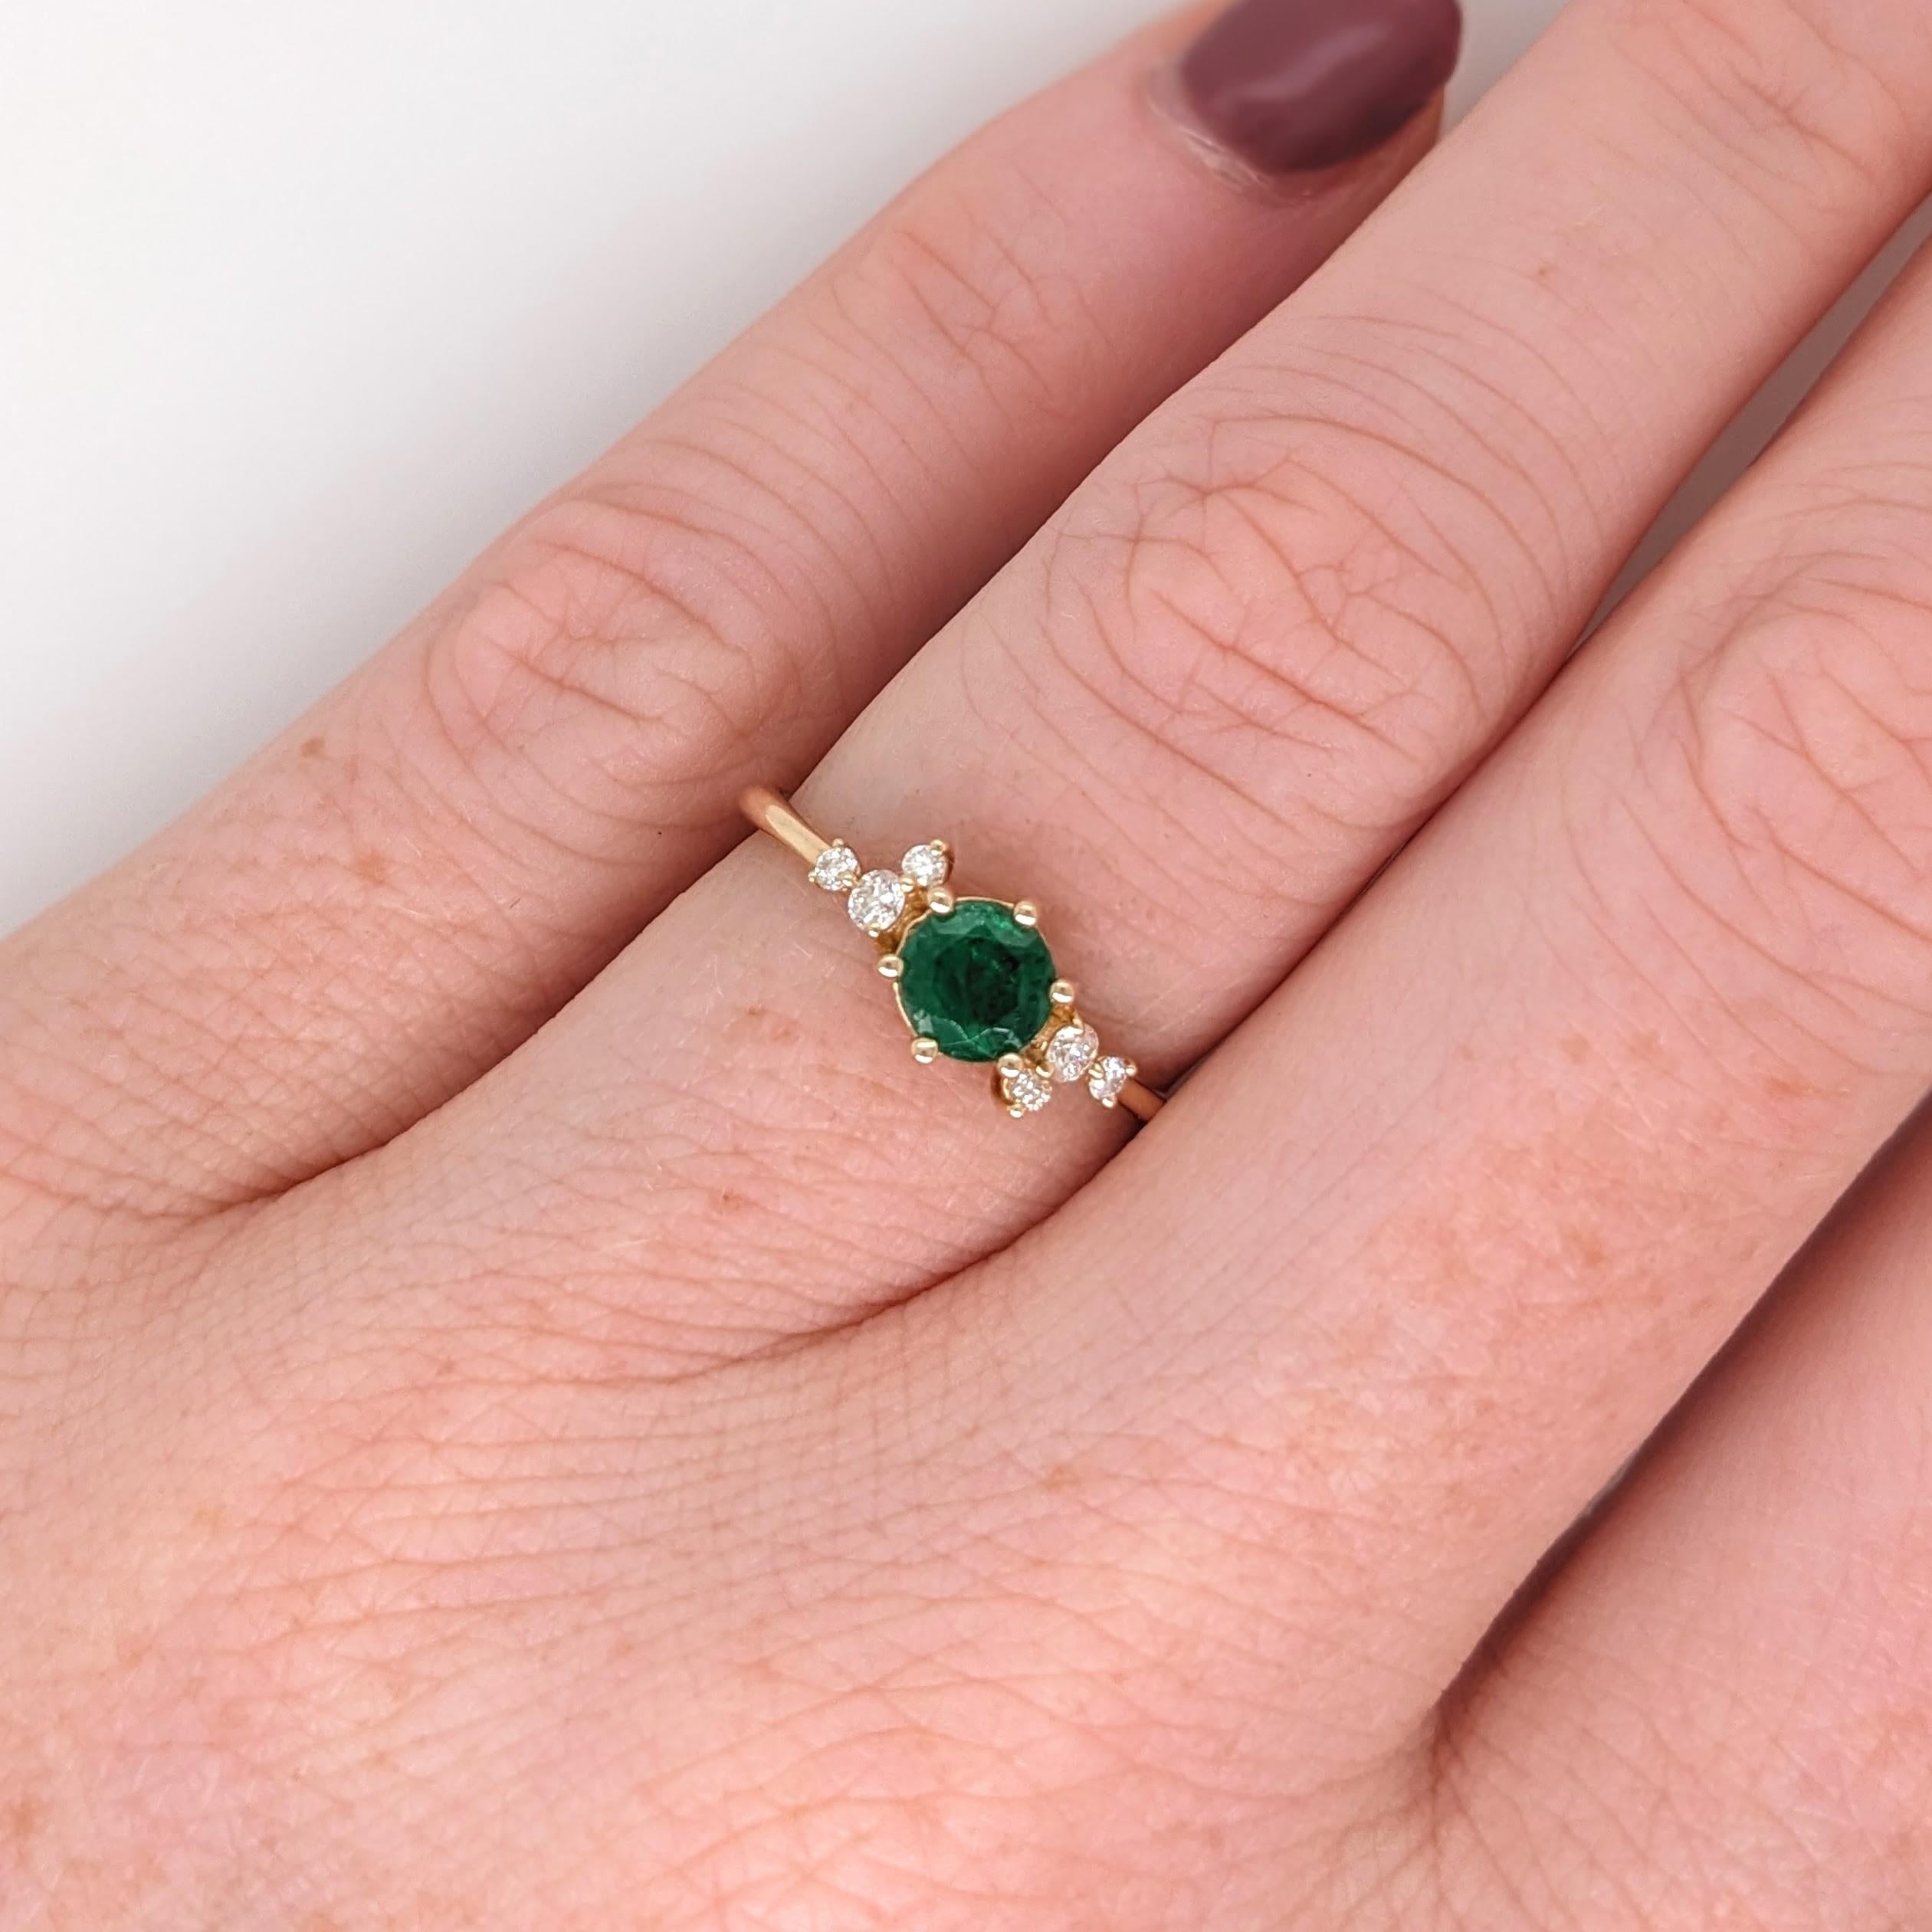 Green Emerald Ring w Earth Mined Diamonds in Solid 14k Yellow Gold Round 5mm